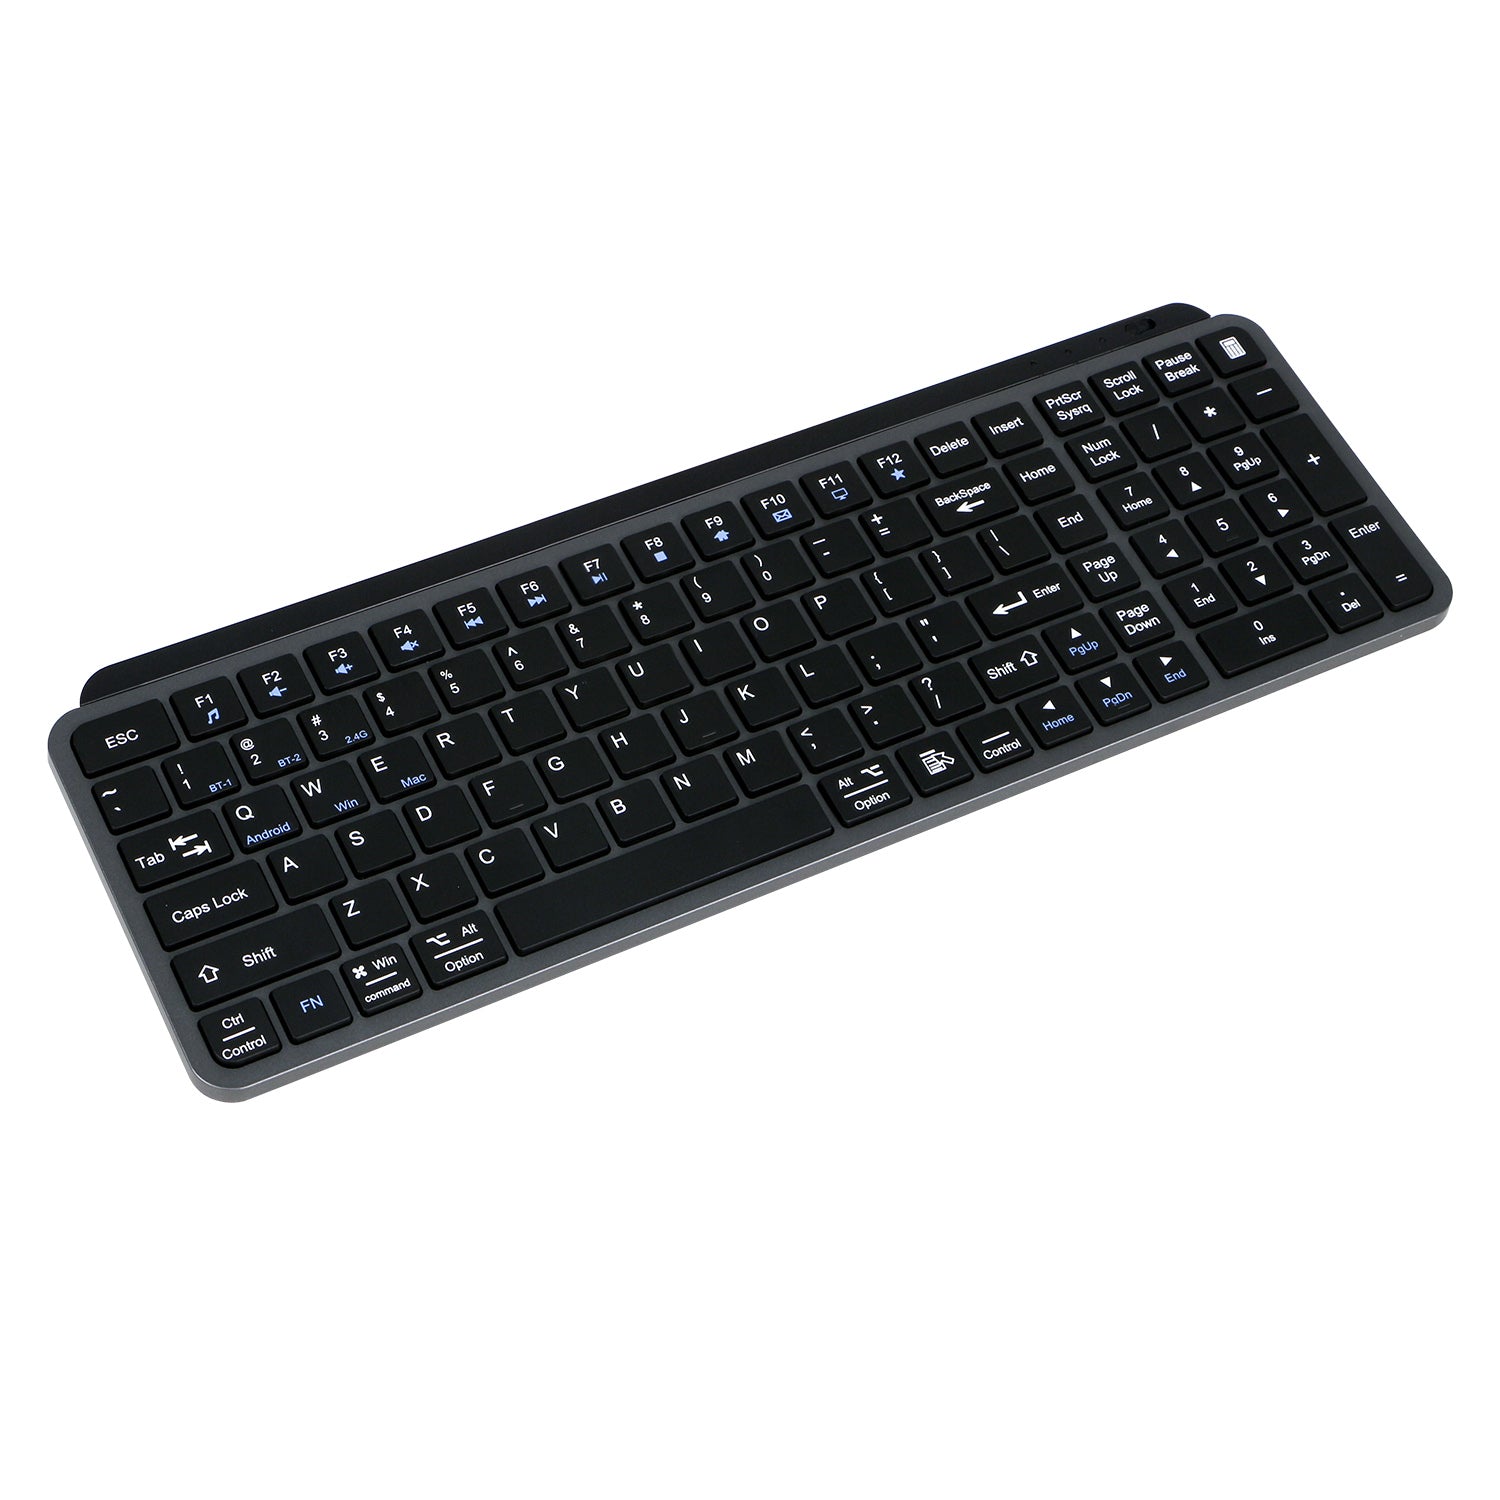 Factory Price Dual-mode Wireless Keyboard support Bluetooth and 2.4G connection for Desktop/Laptop/Tablet/Phone